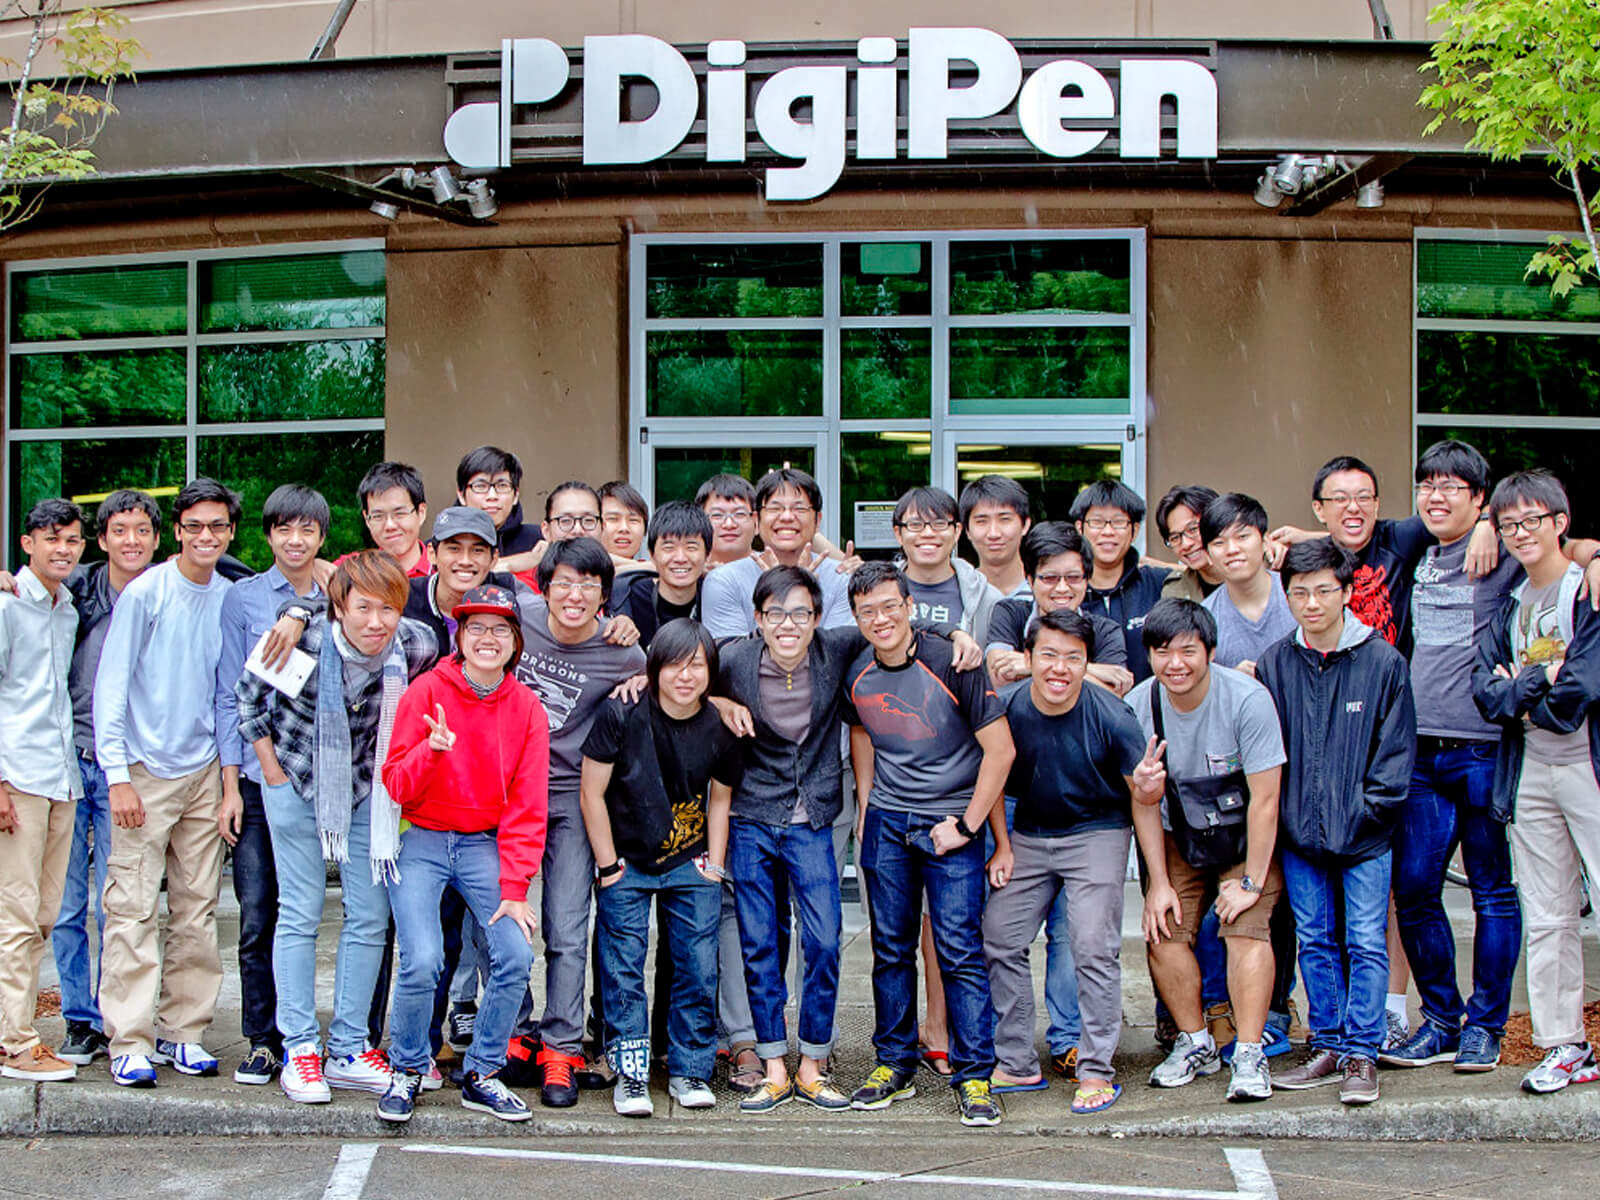 Dozens of students pose for a picture in front of a building with the DigiPen logo and name above the door